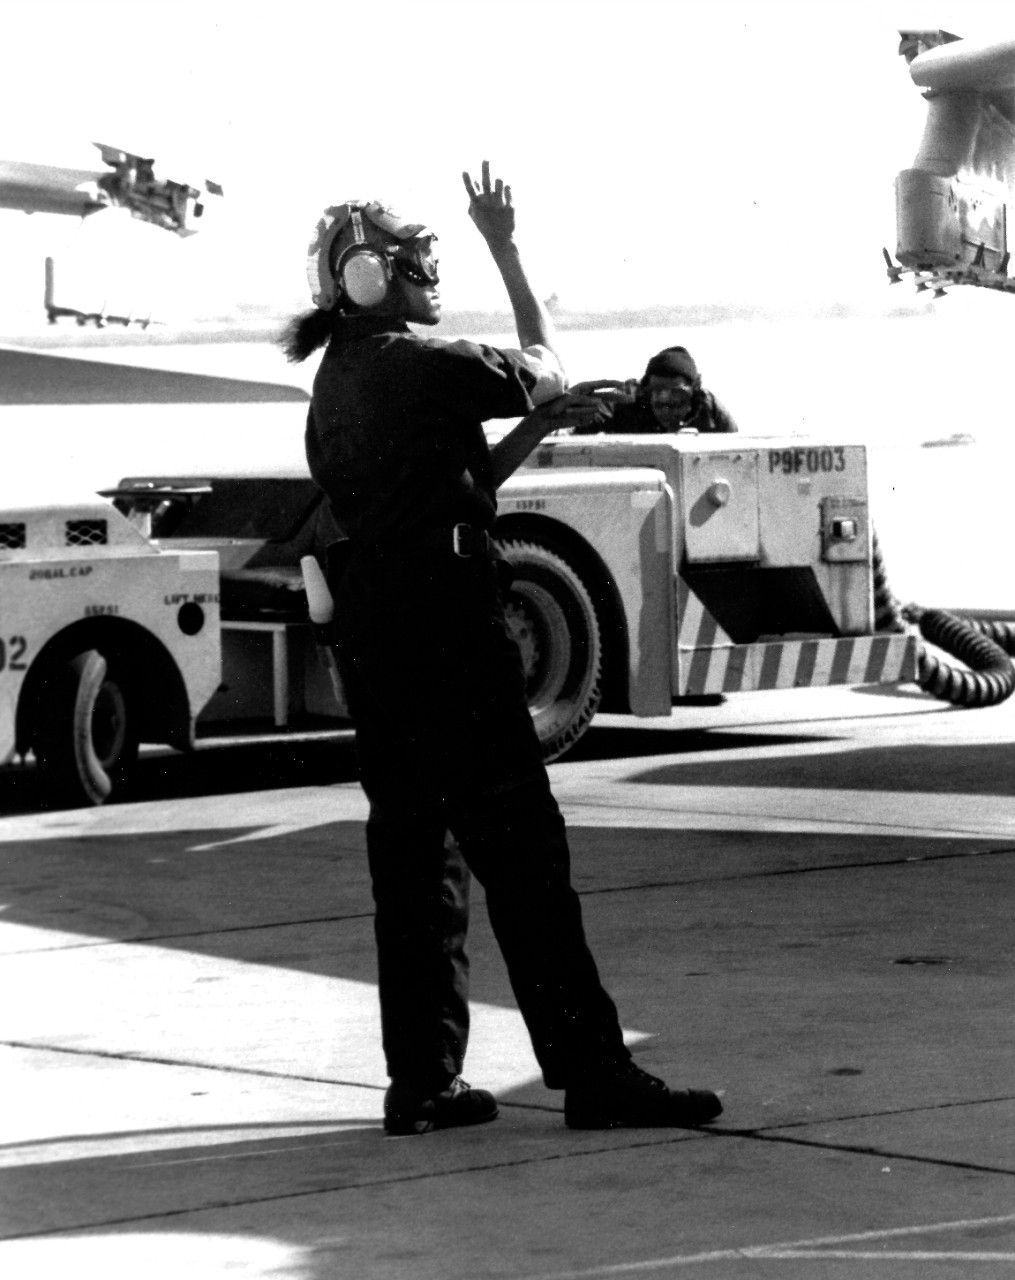 330-CFD-DN-SN-89-01686:   Airman Ora Howard, November 1988.   Howard, Plane Captain, signals instructions to the pilot of an A-7 Corsair II aircraft.  Photograph by JO3 Cyndi Reilly and received November 22, 1988.    Official U.S. Navy Photograph, now in the collections of the National Archives.